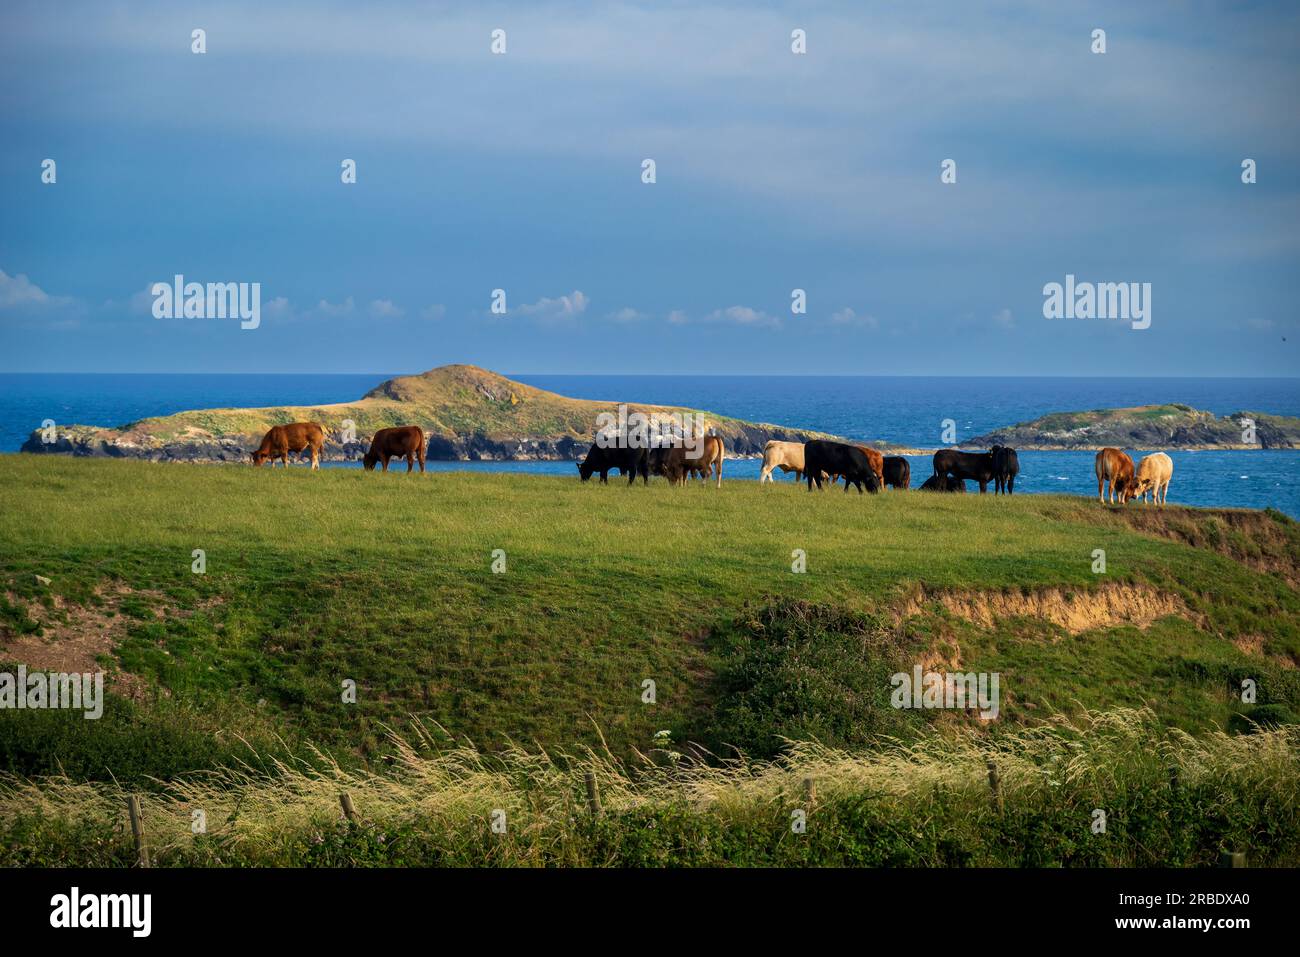 Herd of cows grazing in a field overlooking Aberdaron bay in North Wales. Stock Photo